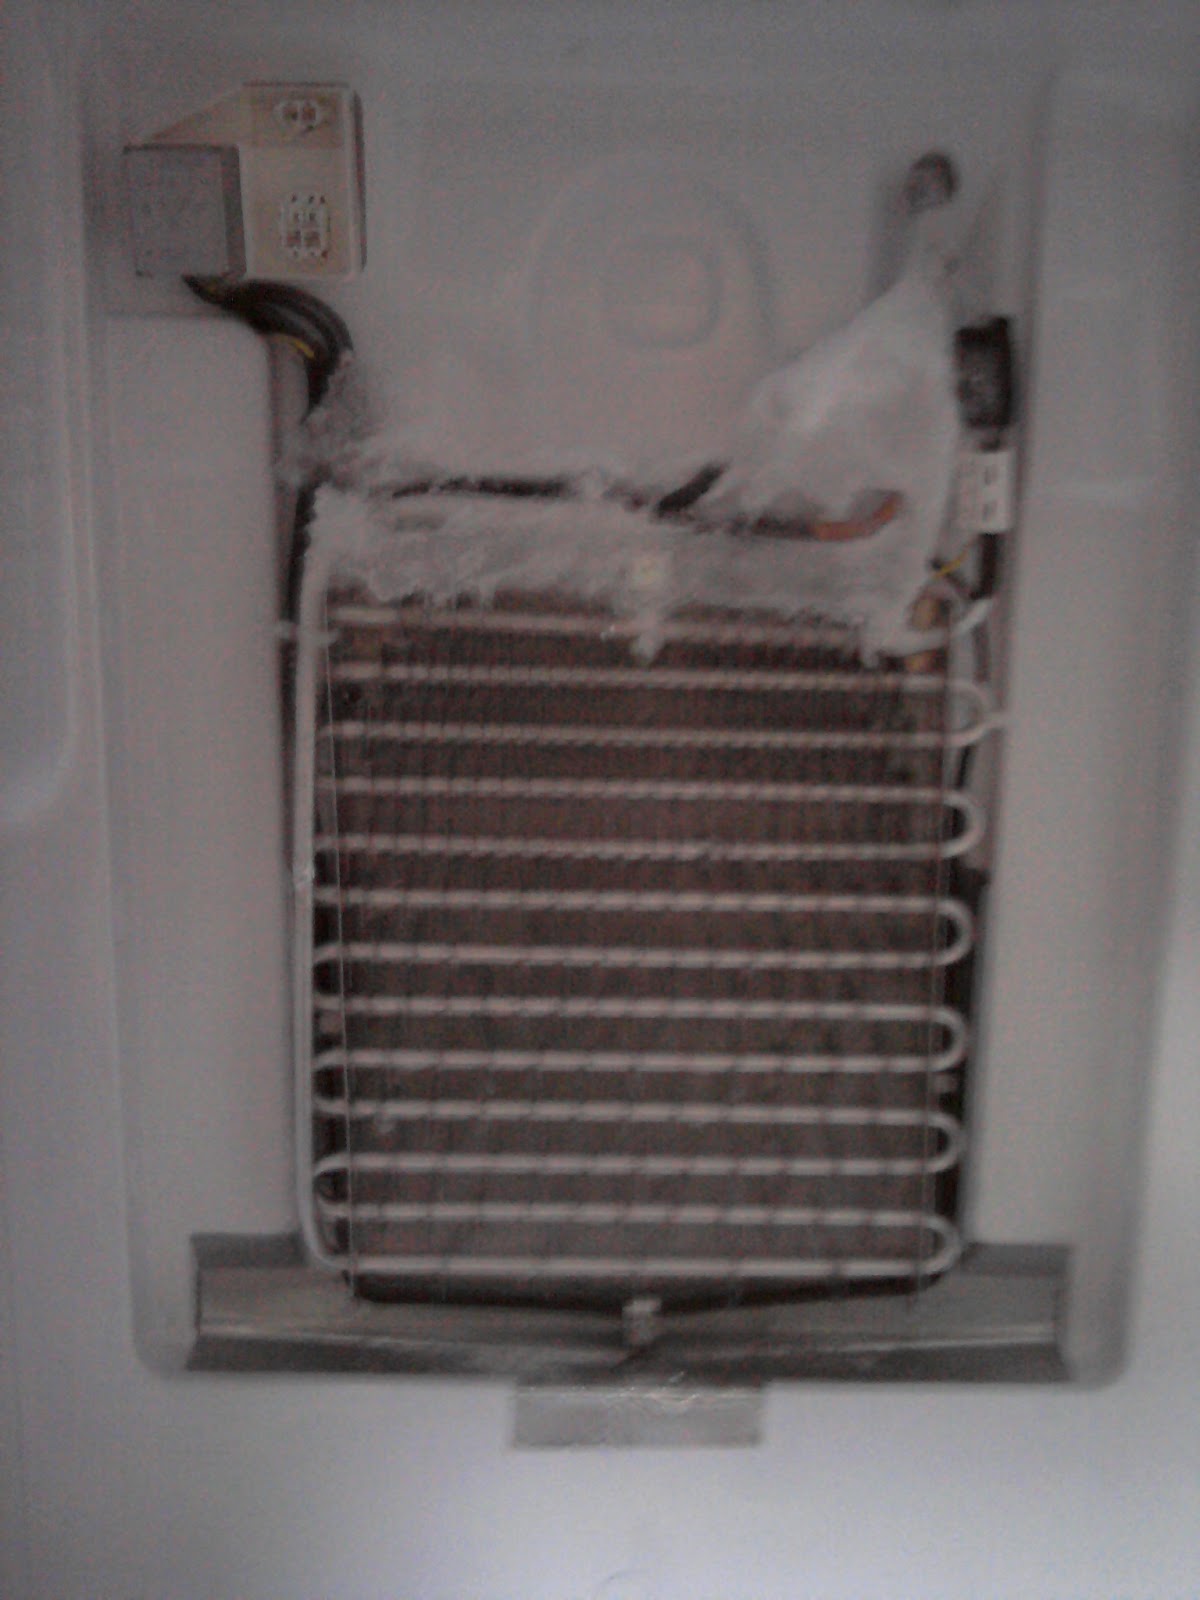 how-to-remove-twin-cooling-panel-on-samsung-refrigerator